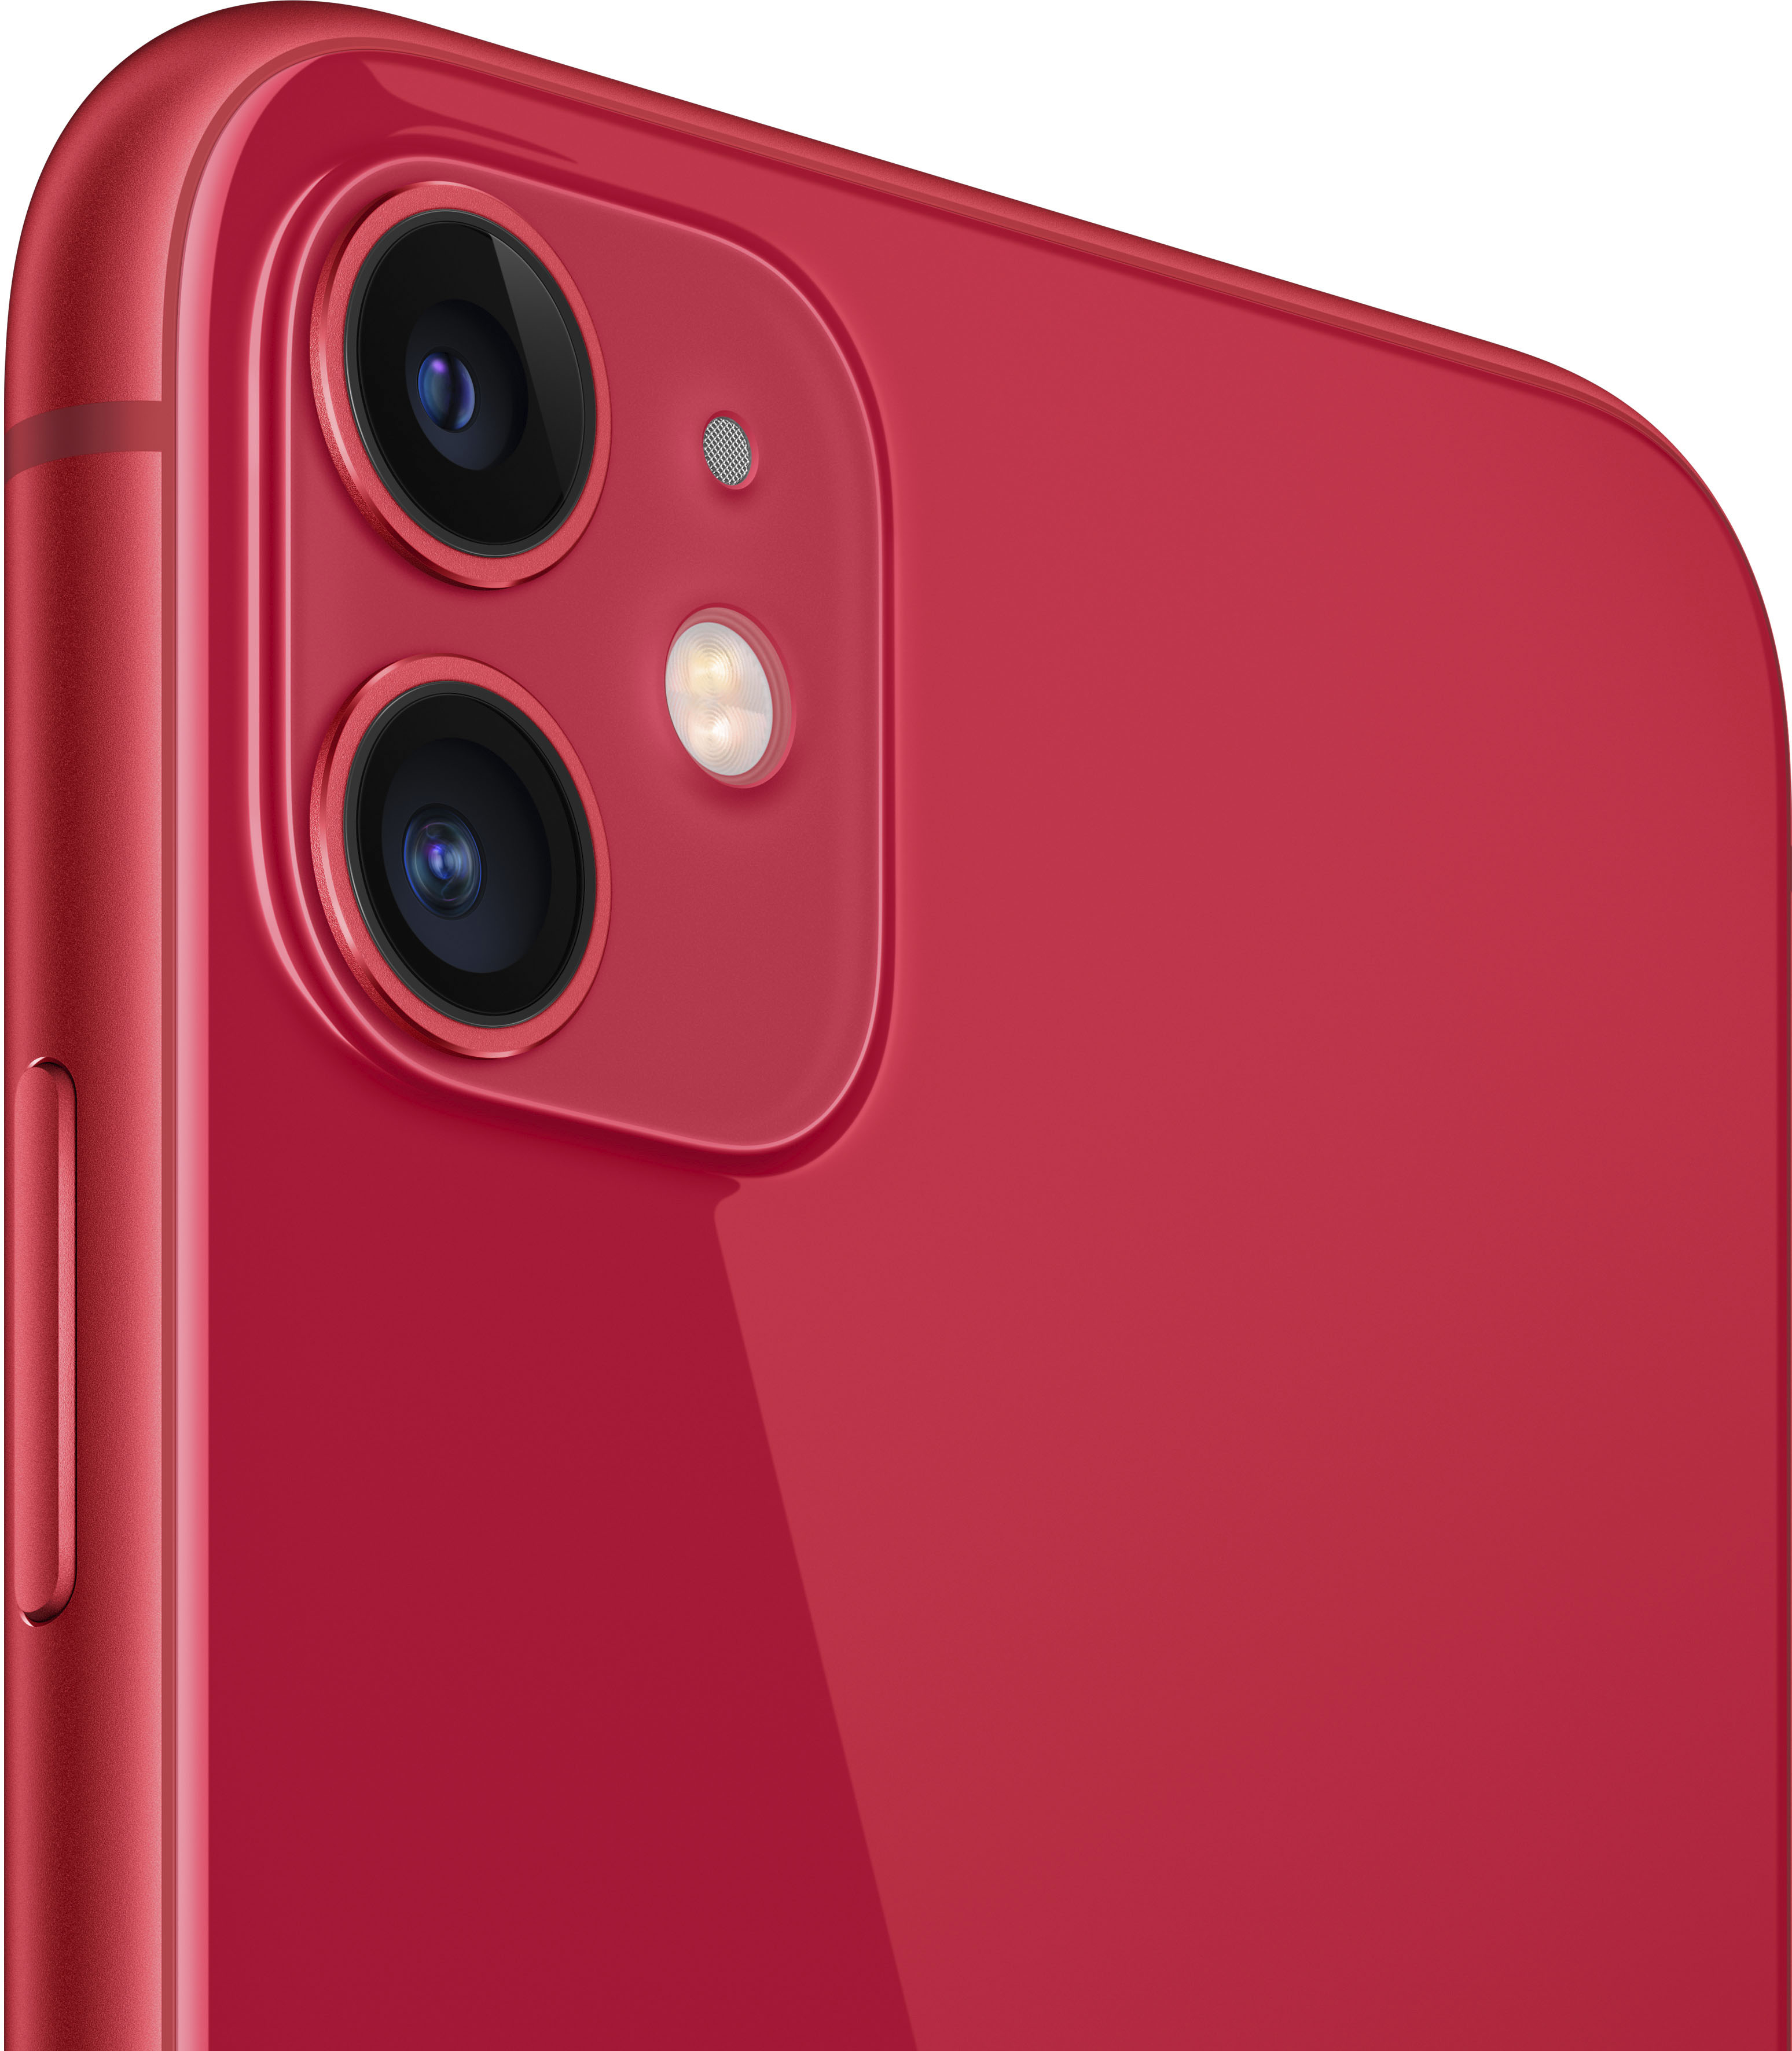 Back View: AppleCare+ Theft & Loss for iPhone 11 - Monthly Plan